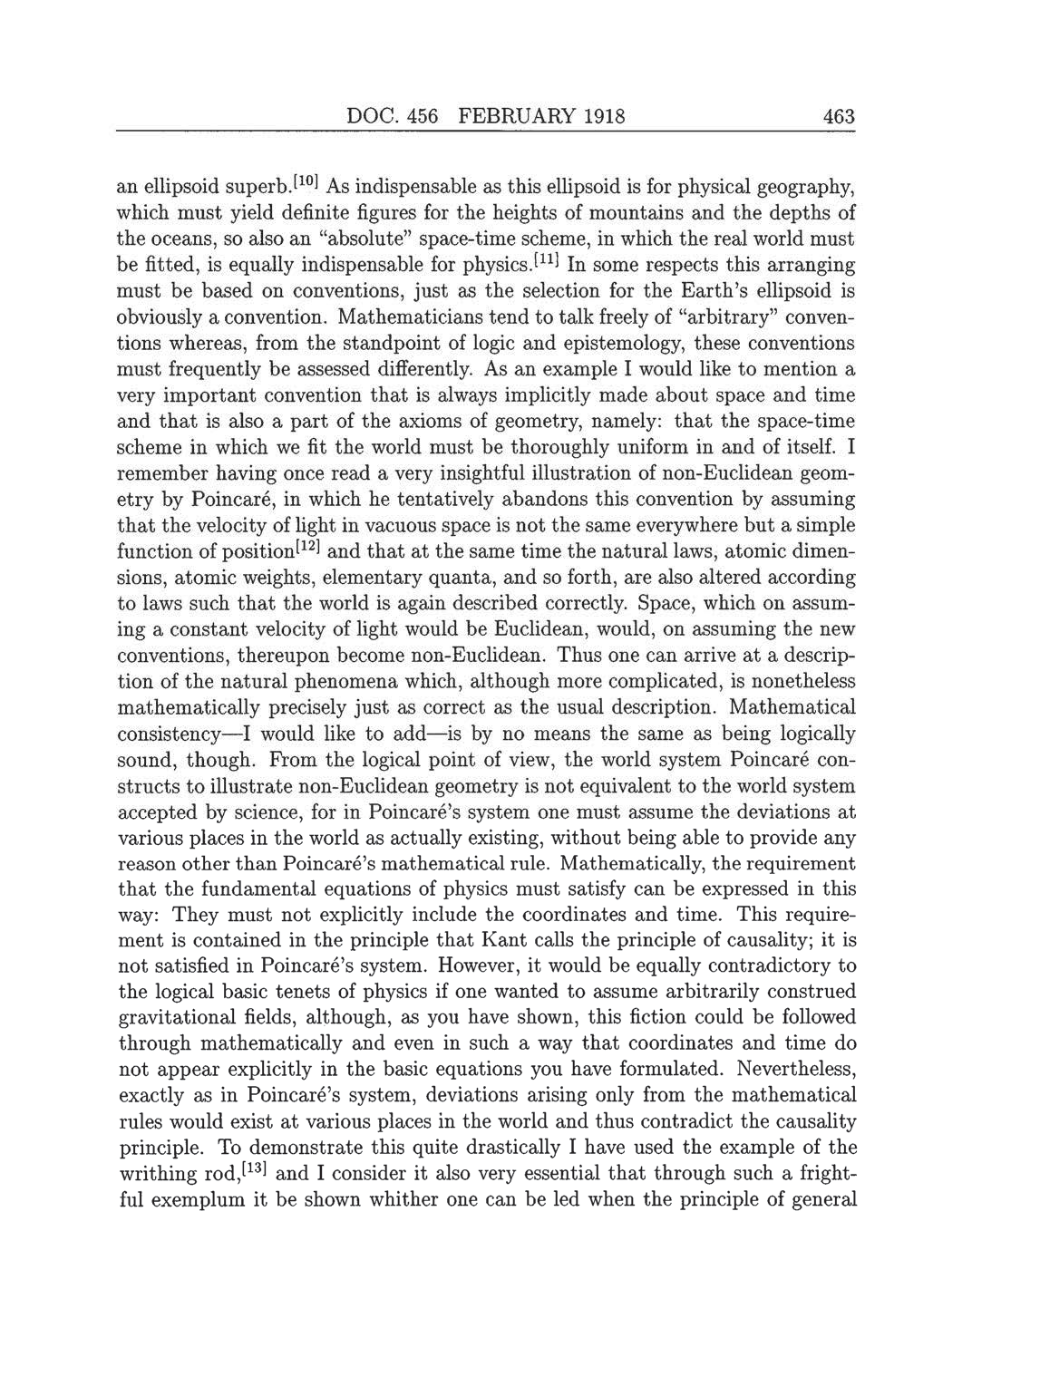 Volume 8: The Berlin Years: Correspondence, 1914-1918 (English translation supplement) page 463